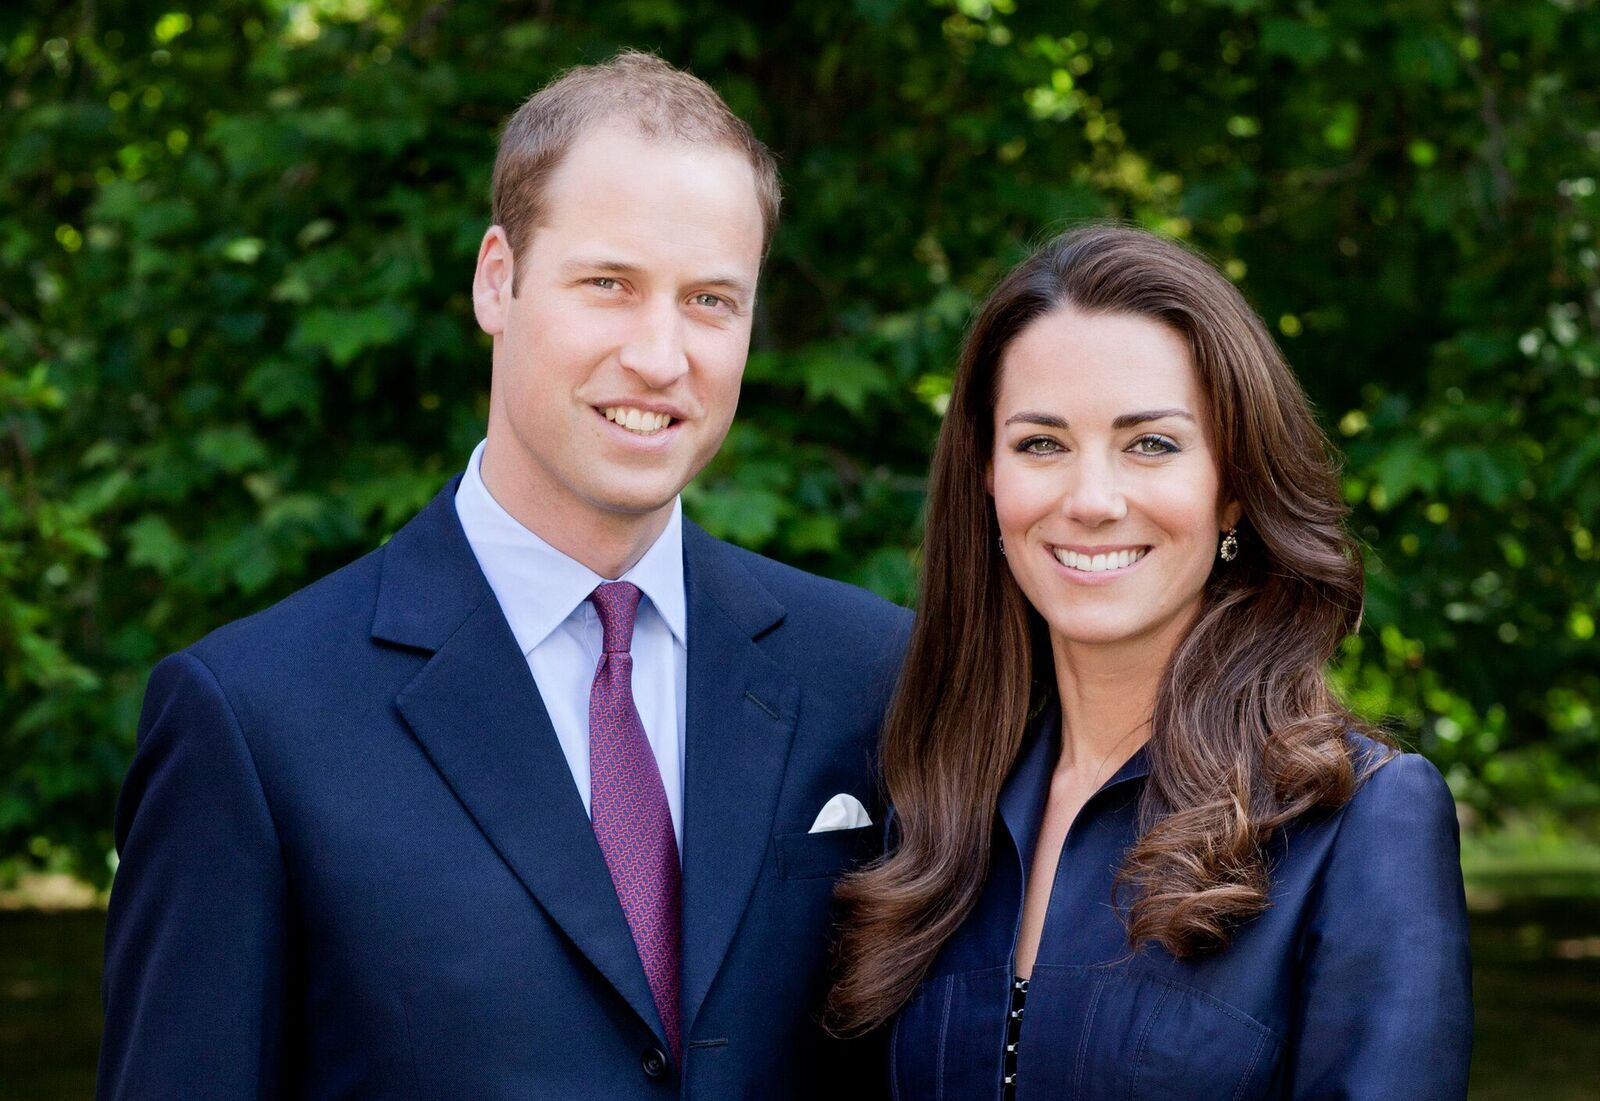 Prince William, Duke of Cambridge and Catherine, Duchess of Cambridge pose for the official tour portrait for their trip to Canada and California in the Garden's of Clarence House on June 3, 2011 in London | Photo: Getty Images